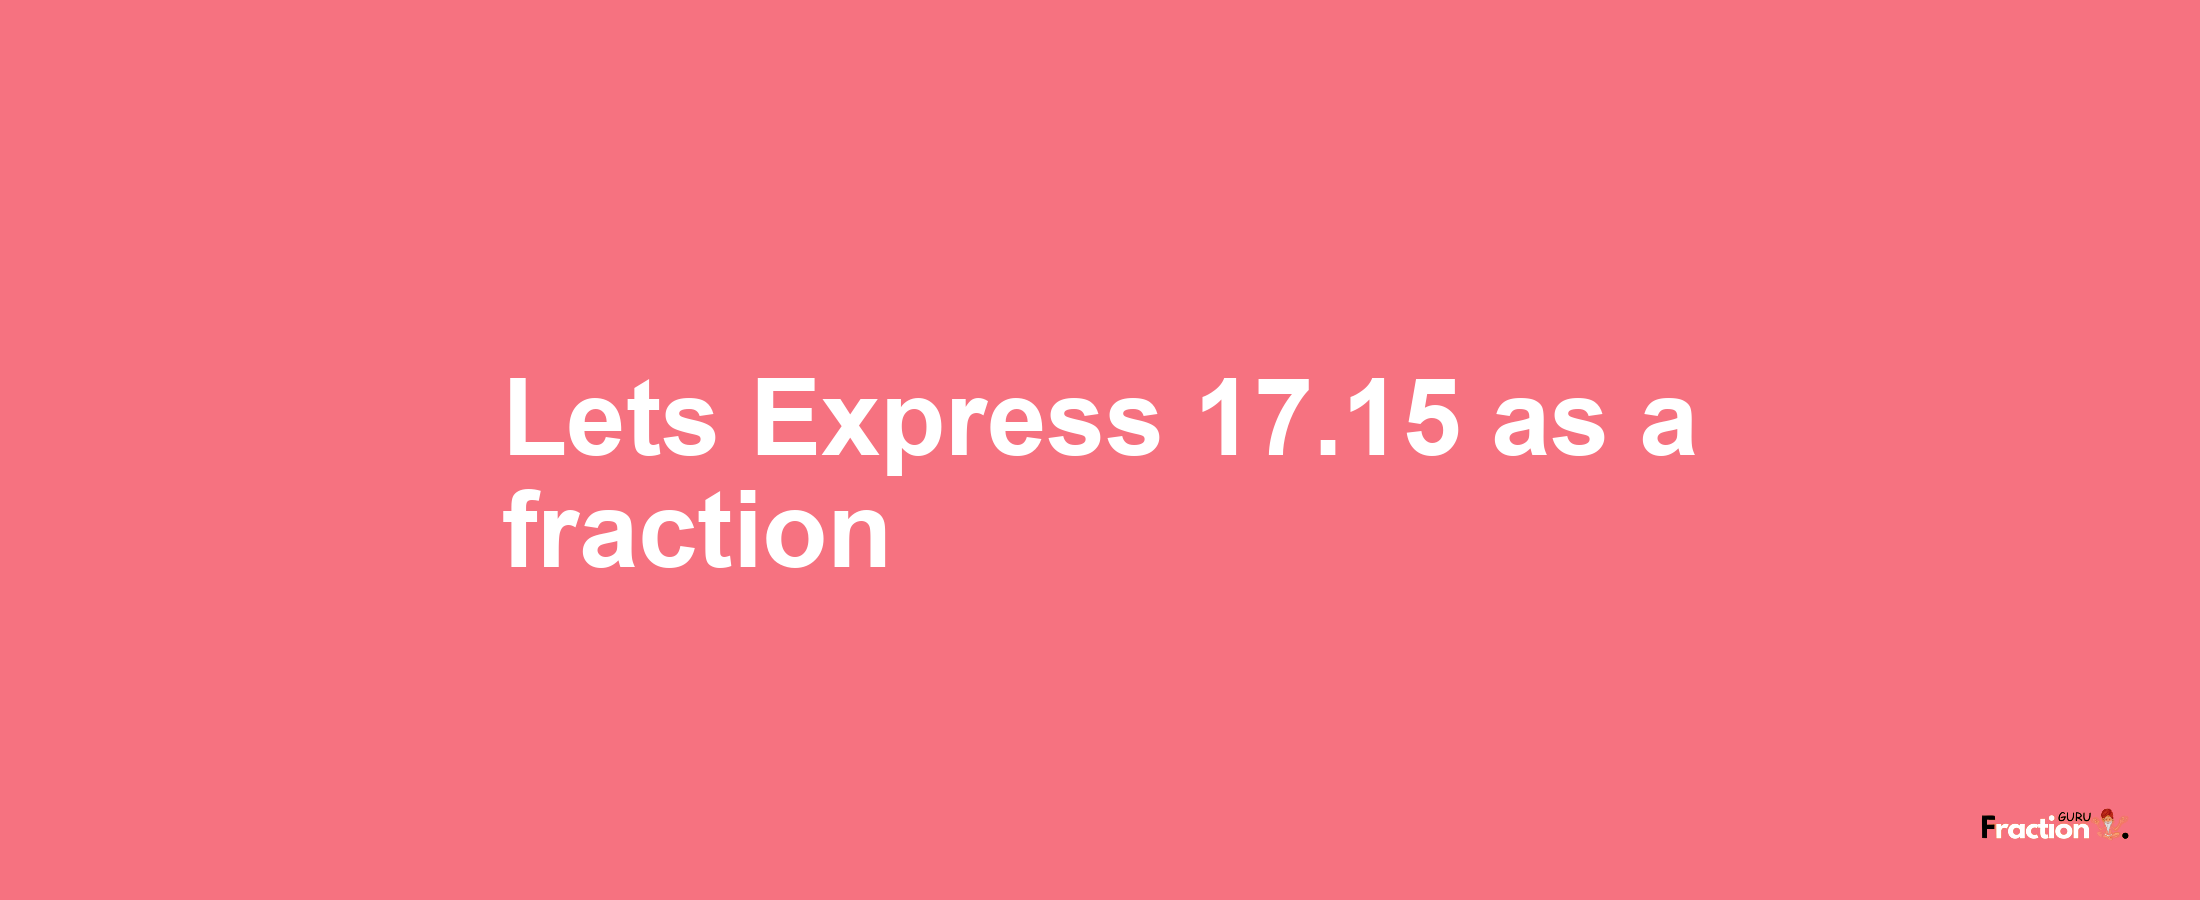 Lets Express 17.15 as afraction